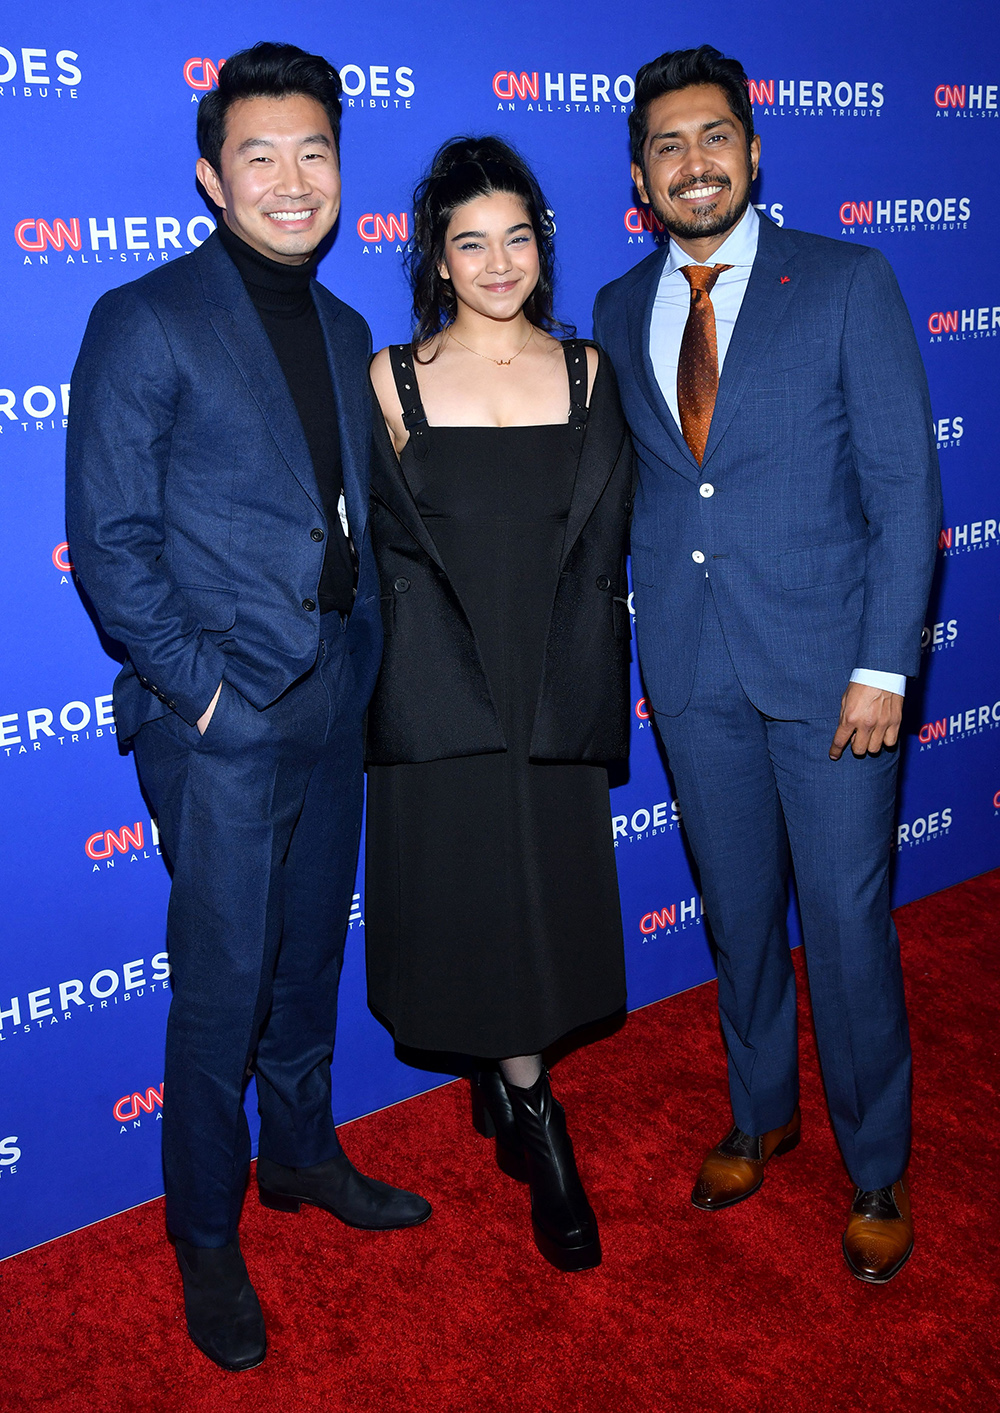 Simu Liu, Iman Vellani and Tenoch Huerta teamed up on the red carpet at the CNN Heroes All-Star. Theyâ€™re all parts of the Marvel Universe